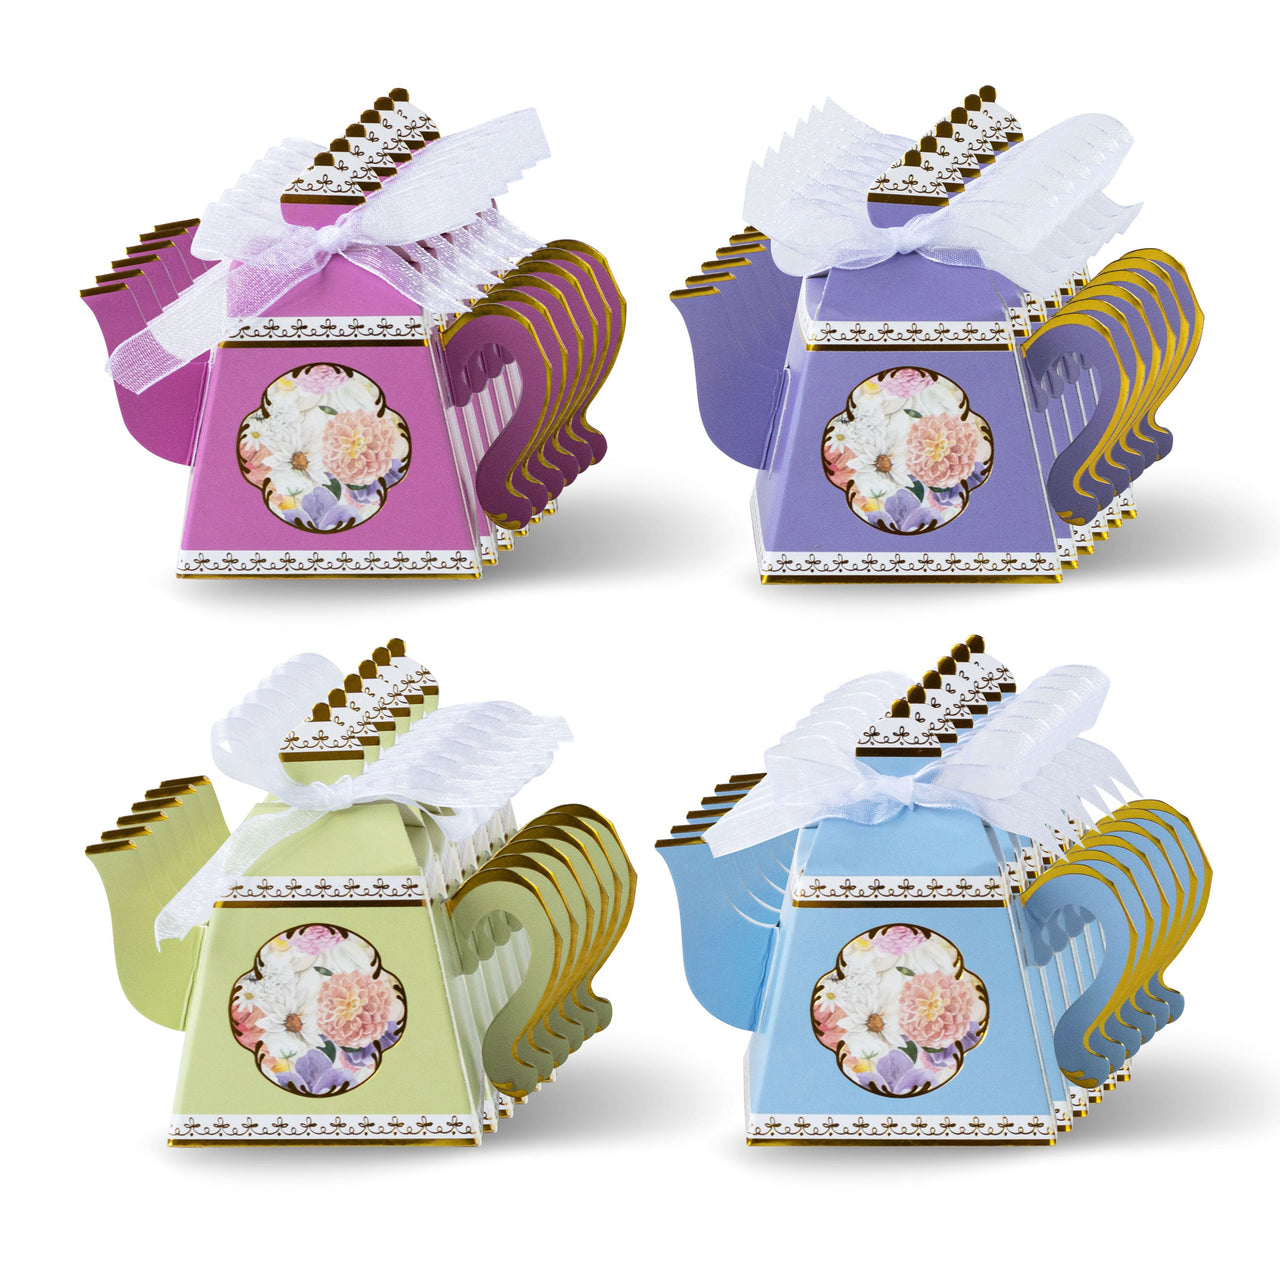 Tea Time Party Favor Box - Assorted (Set of 24) - Alternate Image 8 | My Wedding Favors